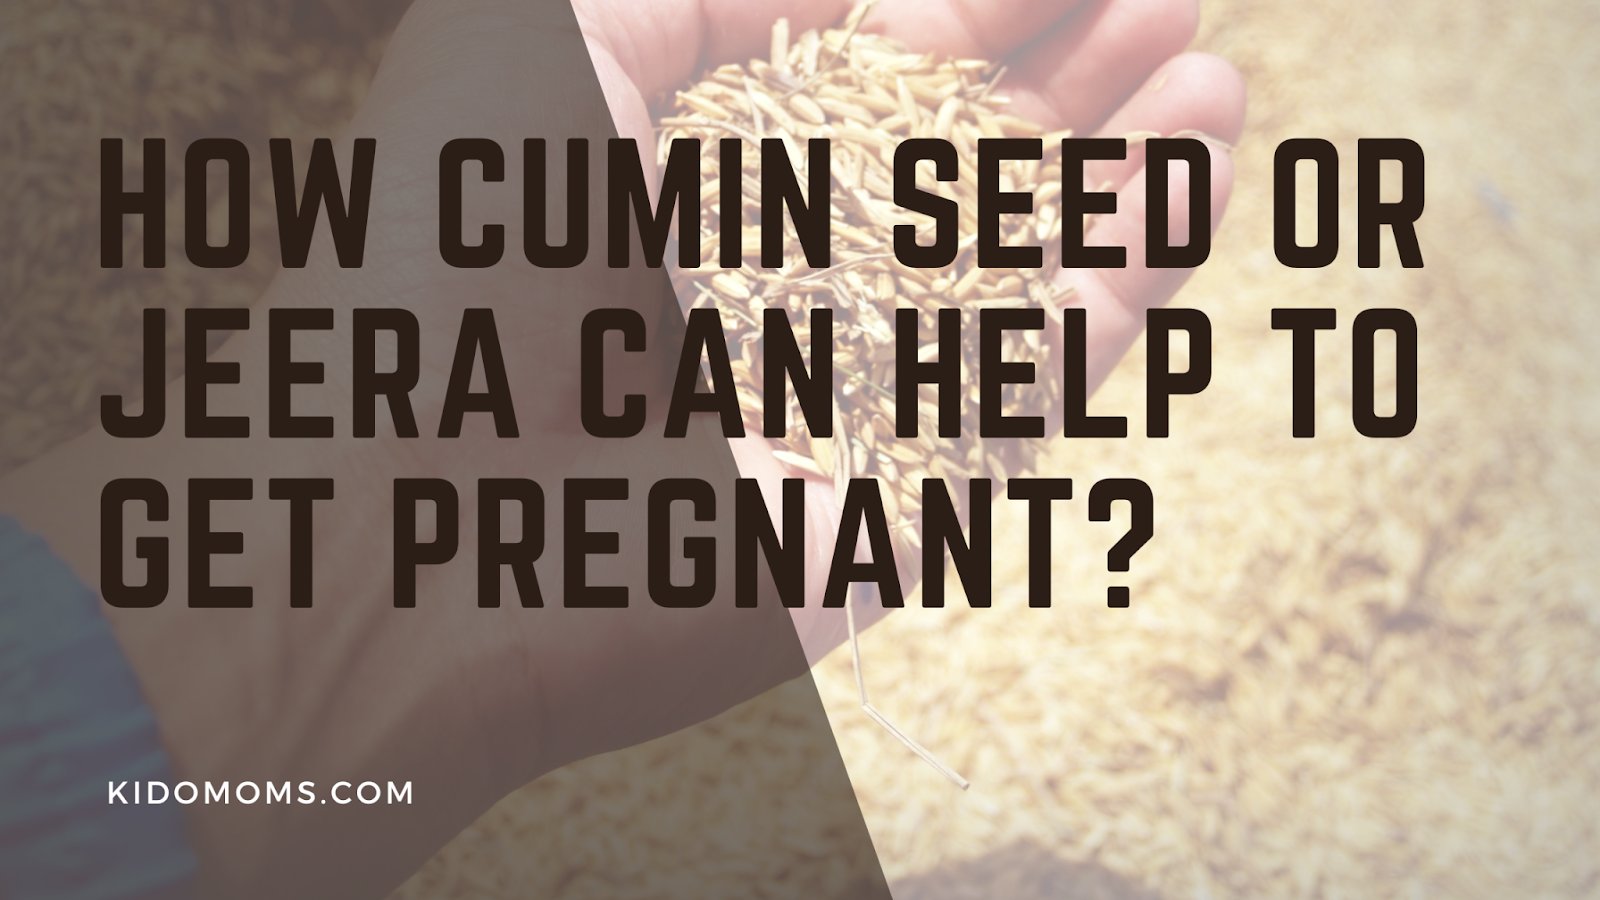 How Cumin Seed or Jeera Can Help to Get Pregnant?